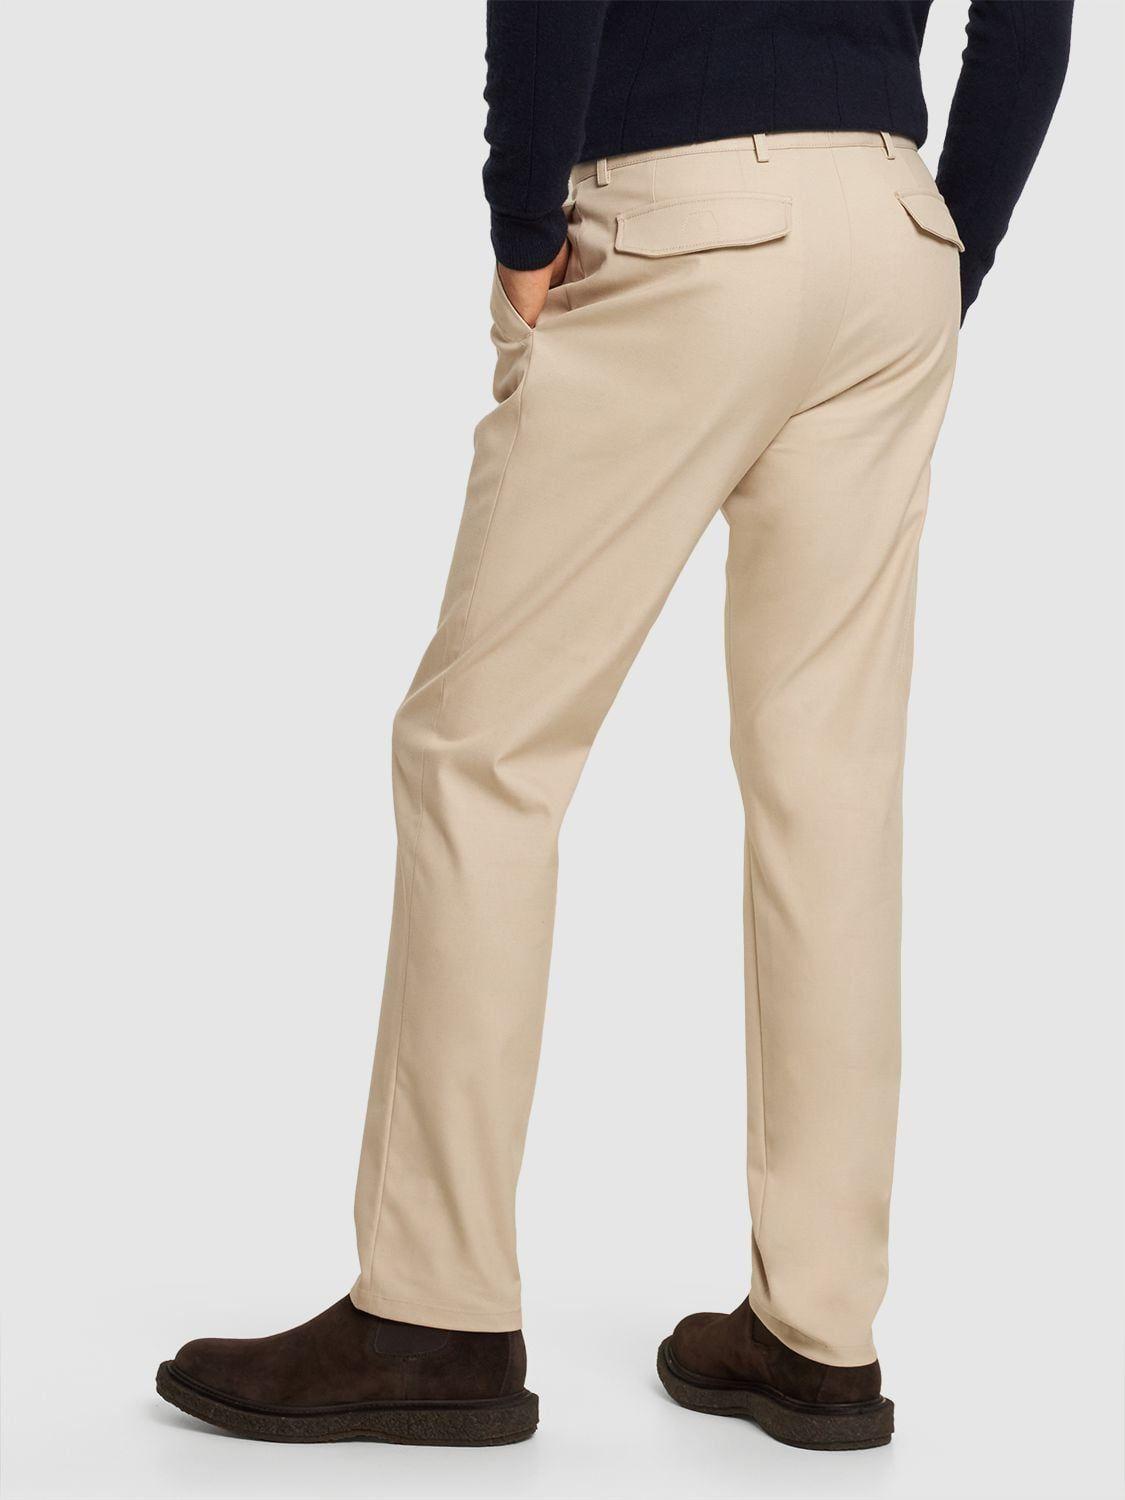 Brioni Dolomite Stretch Cotton Wool Pants in Natural for Men | Lyst